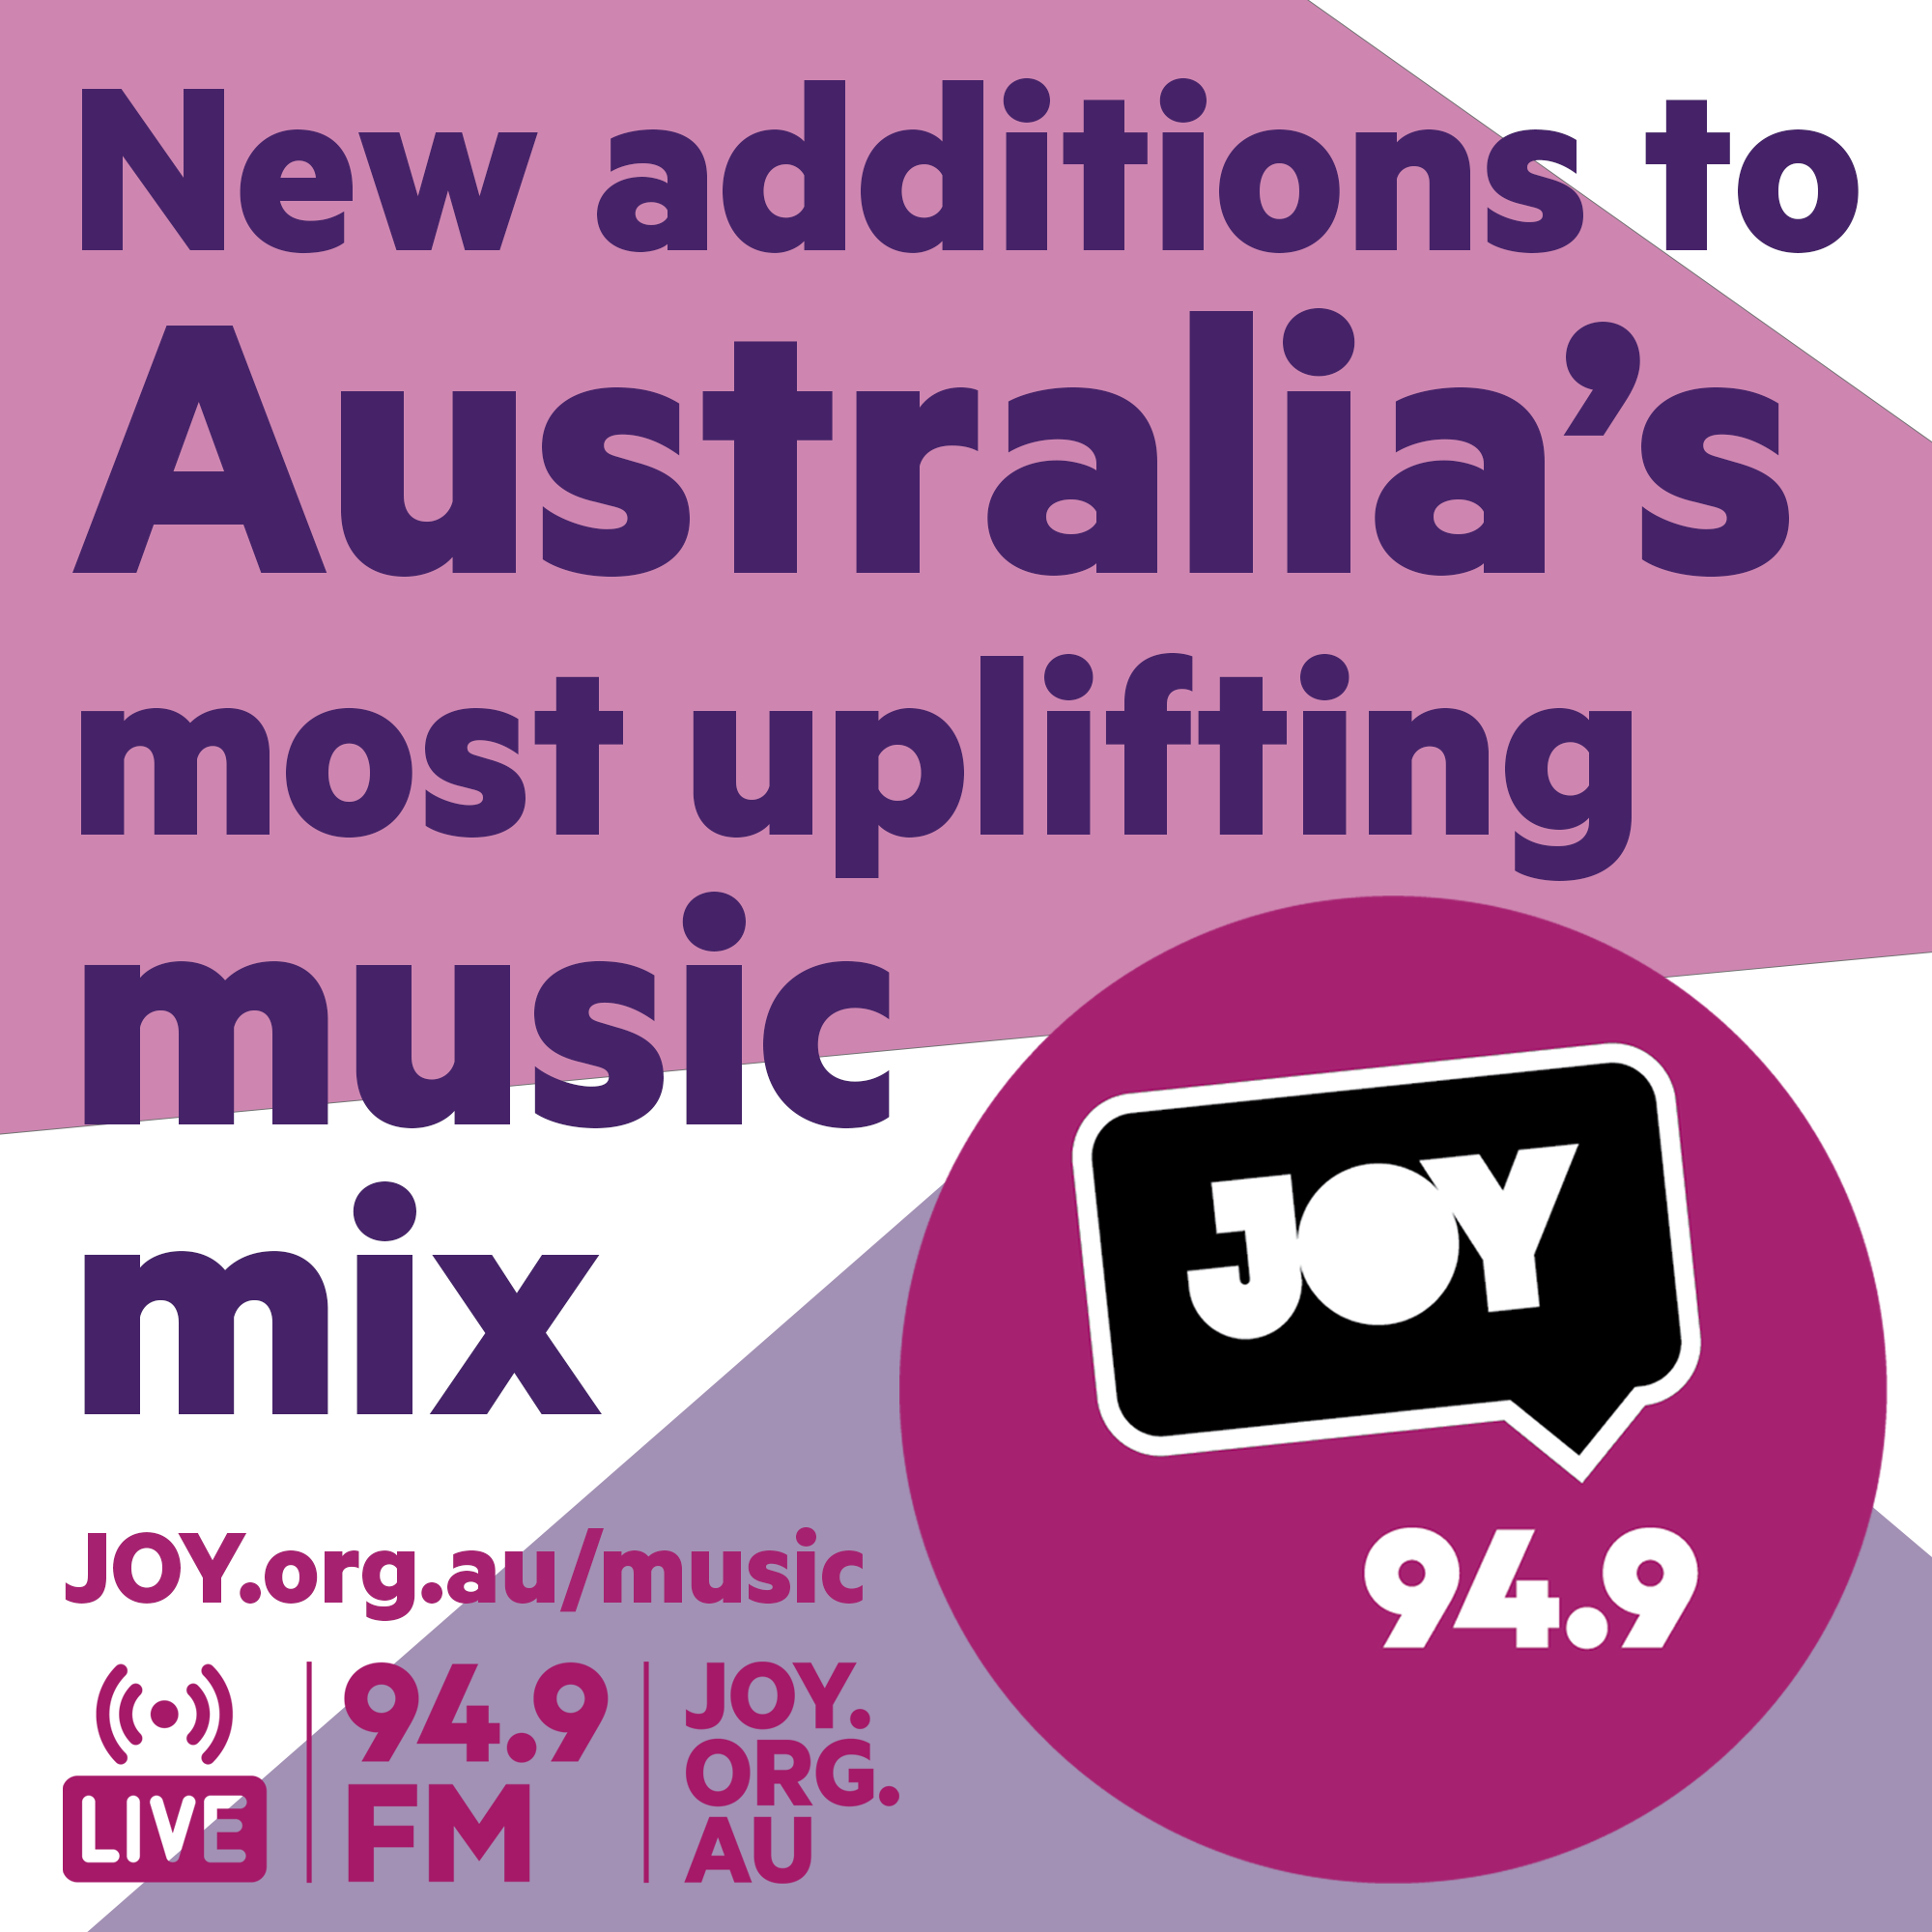 The newest songs to Australia’s most uplifting music mix: 13 July 2022